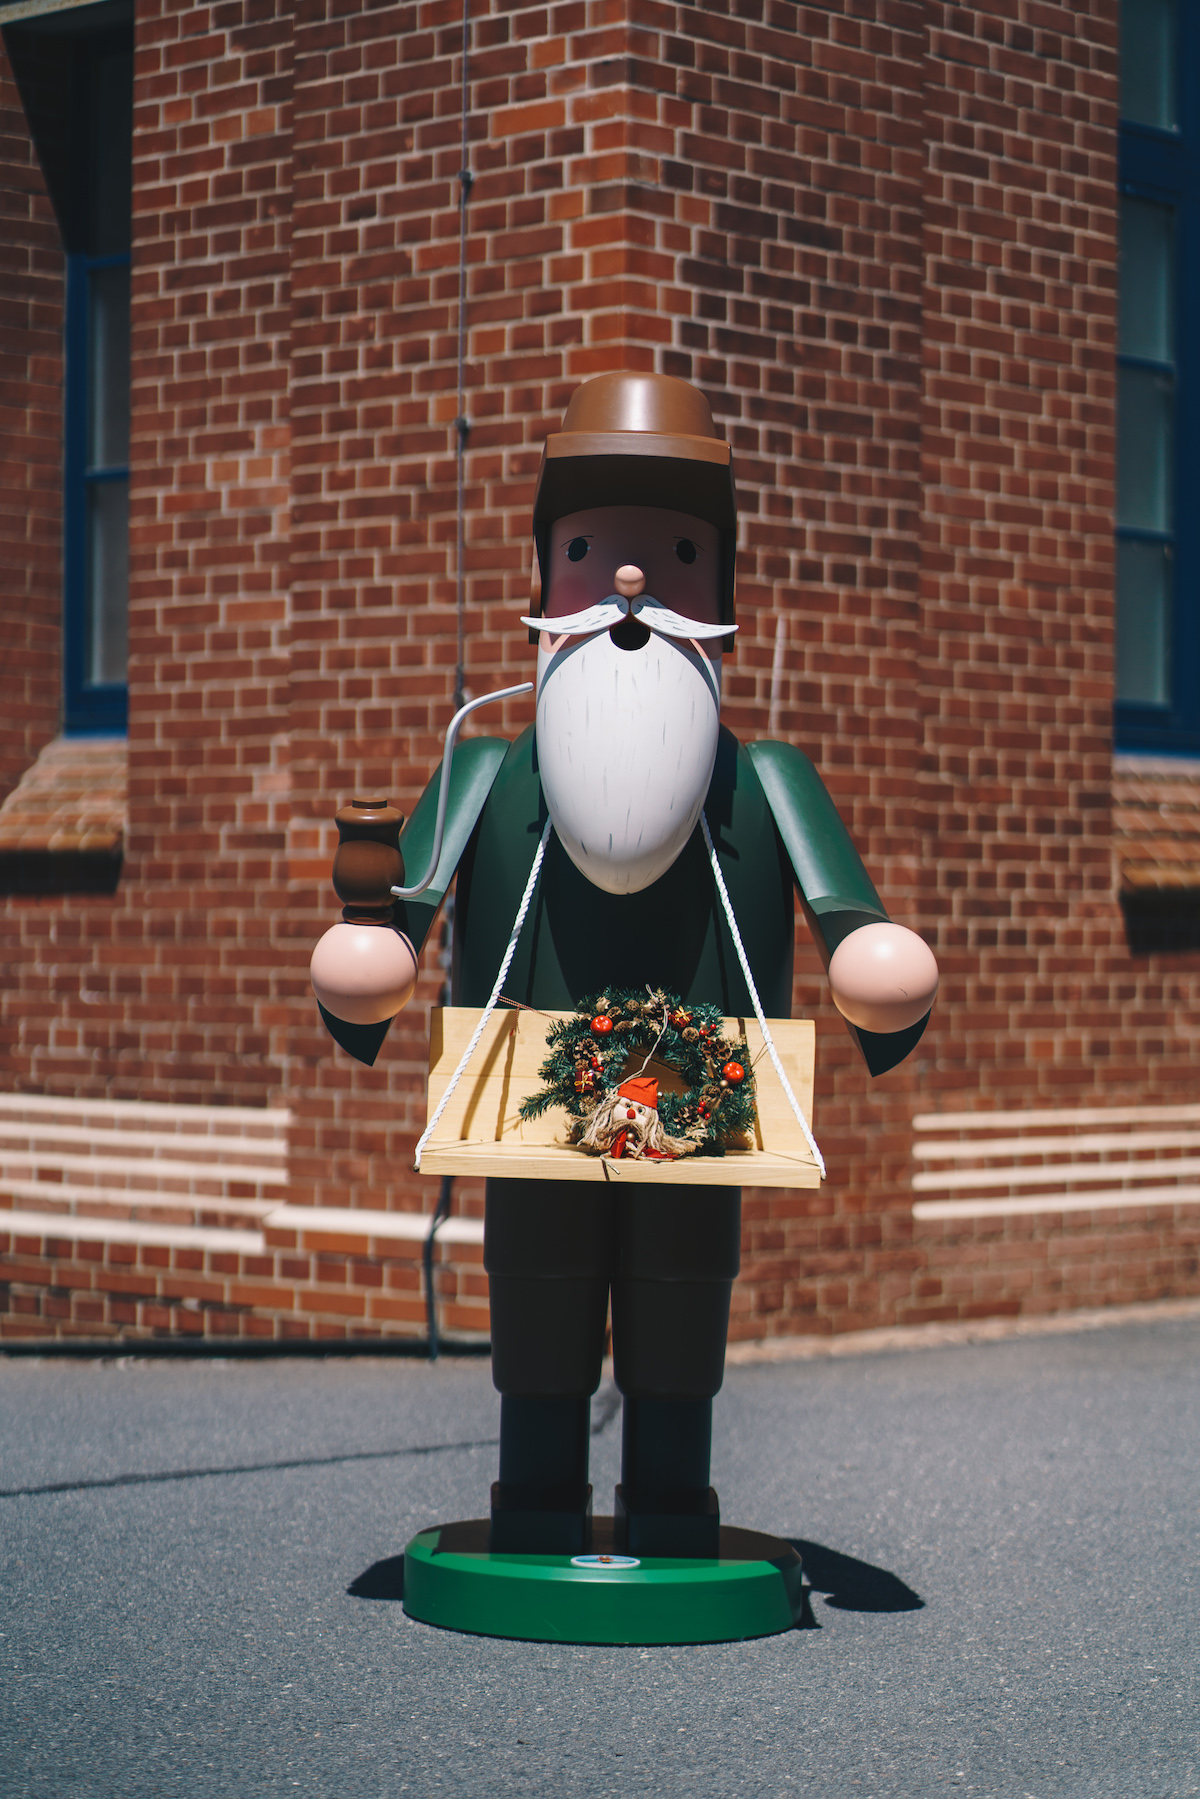 A green, life-size wooden smoker stands in front of a brick wall.